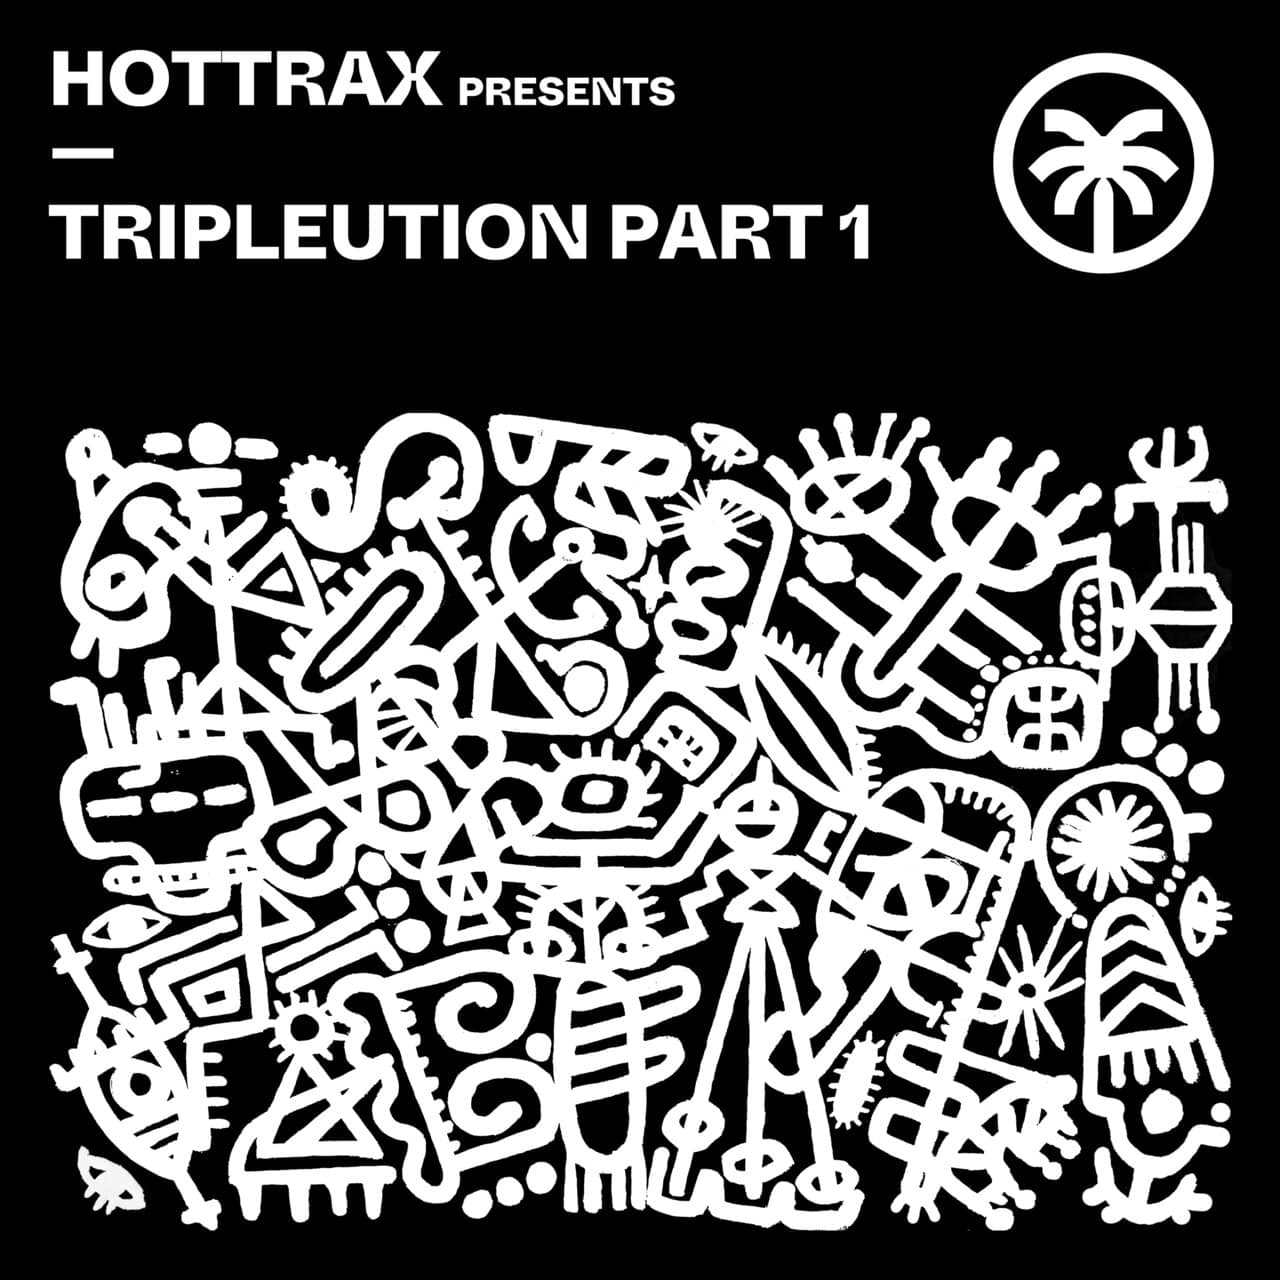 Release Cover: Qubiko - Hottrax presents Tripleution Part 1 on Electrobuzz